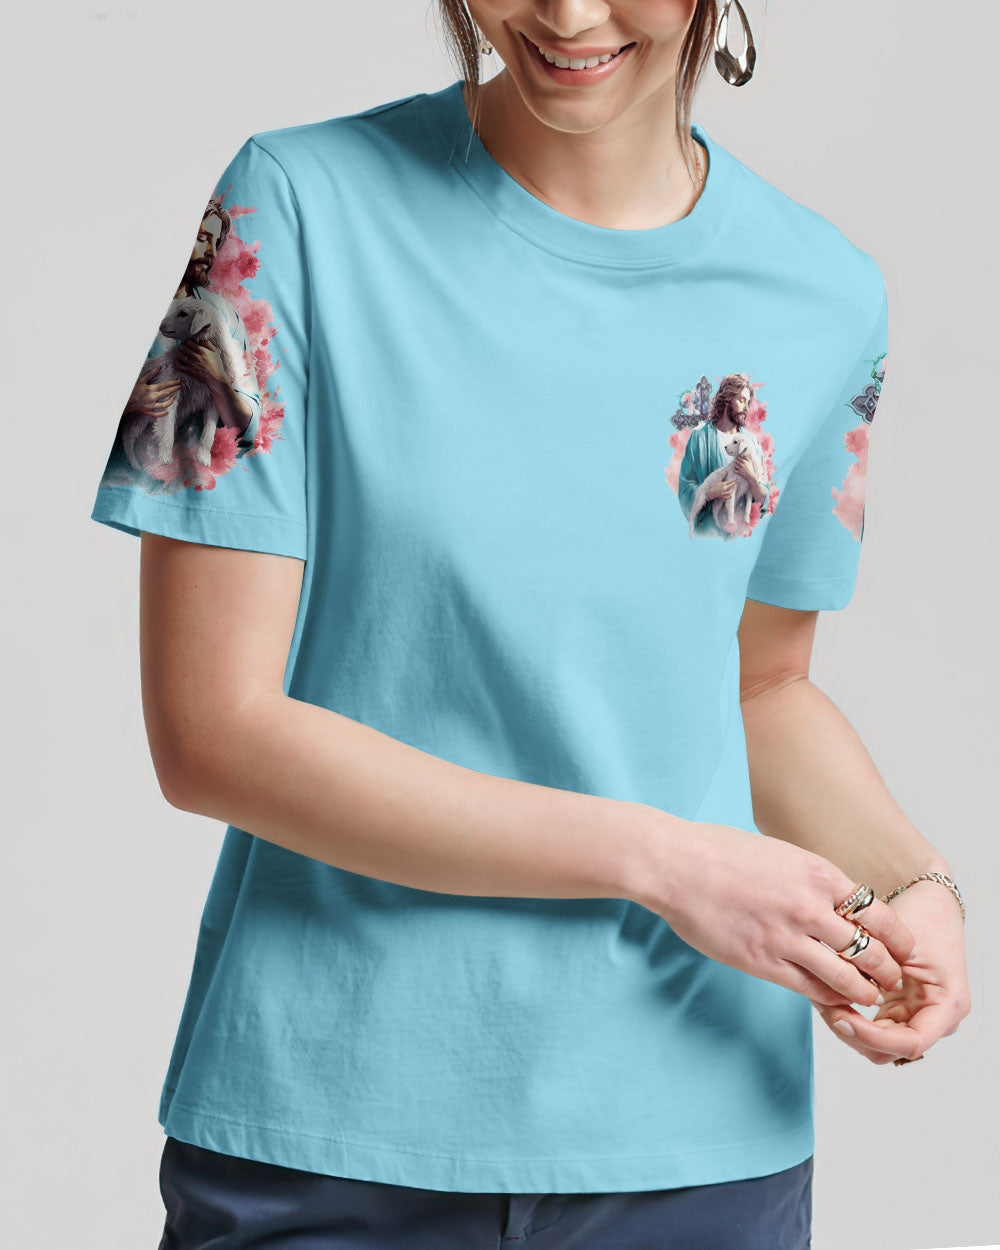 category_Short sleeves